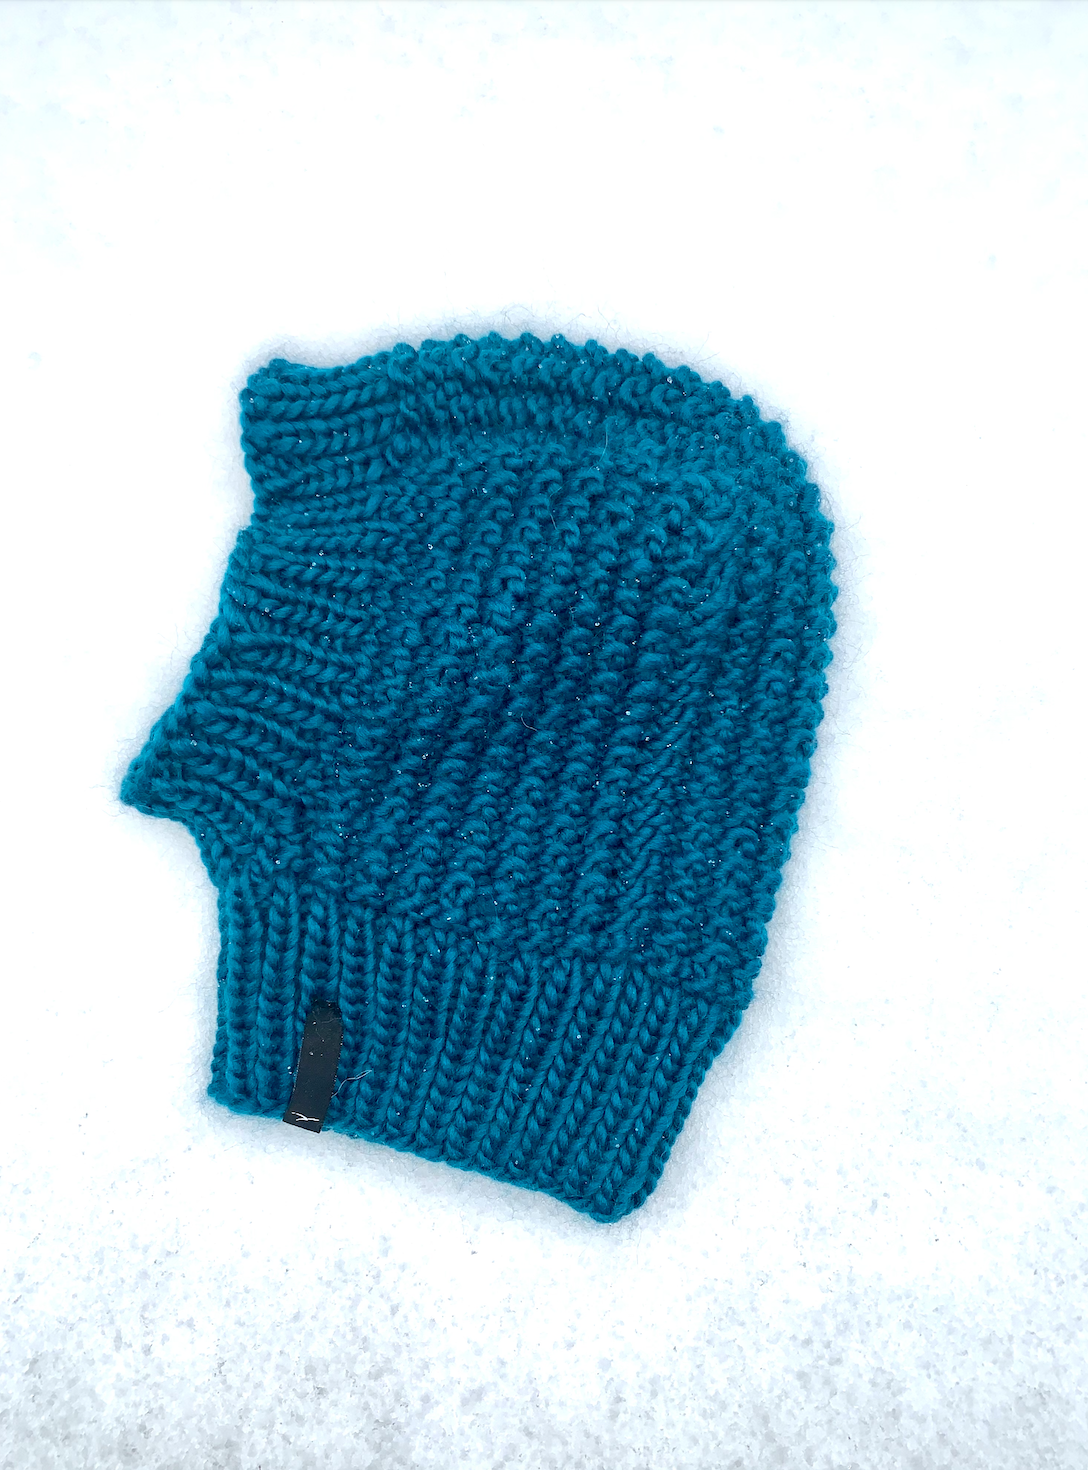 Collective – KNITTED HAND Swallow BALACLAVA